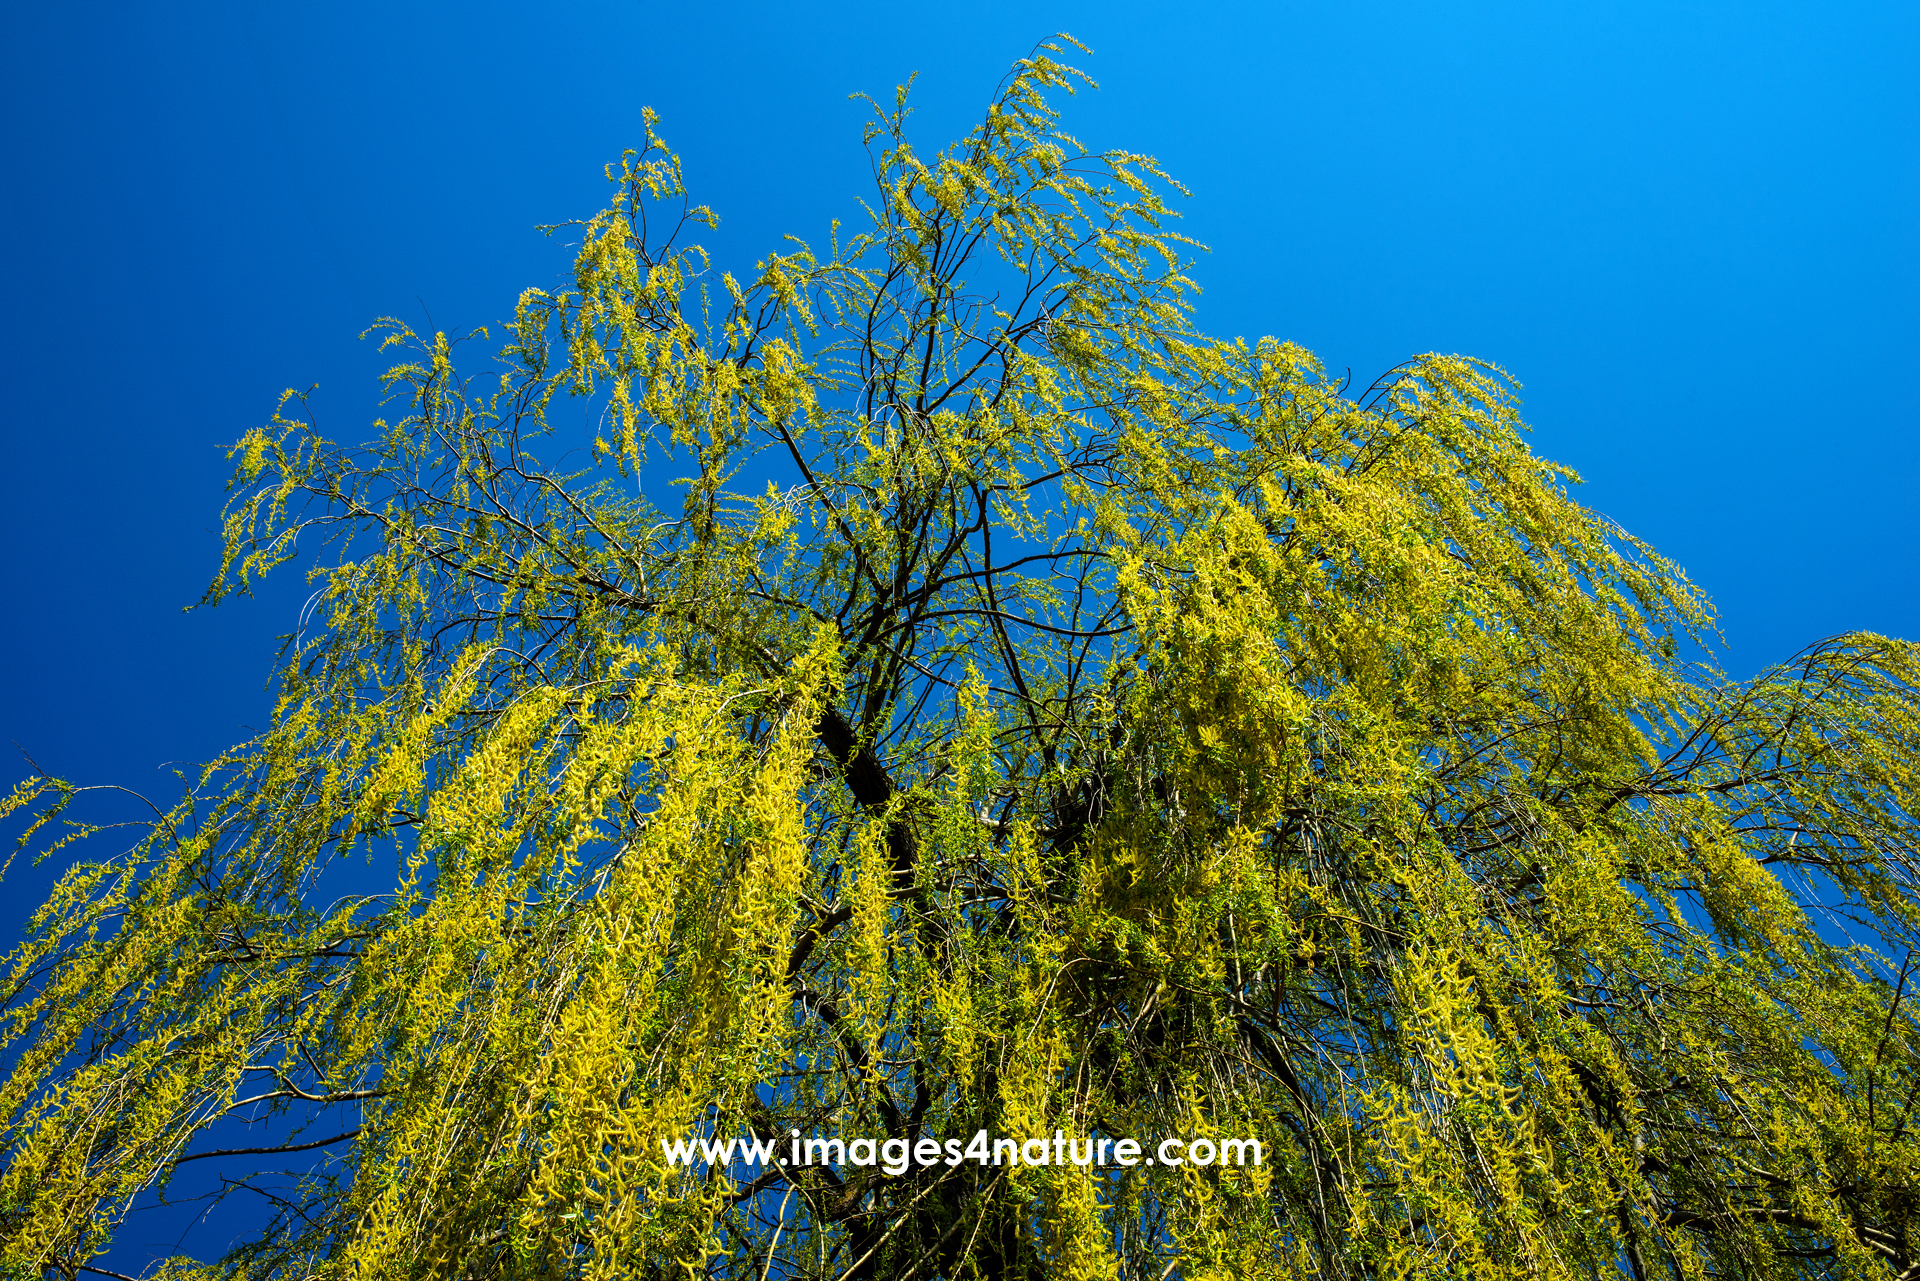 Low angle view of weeping willow tree with fresh green leaves